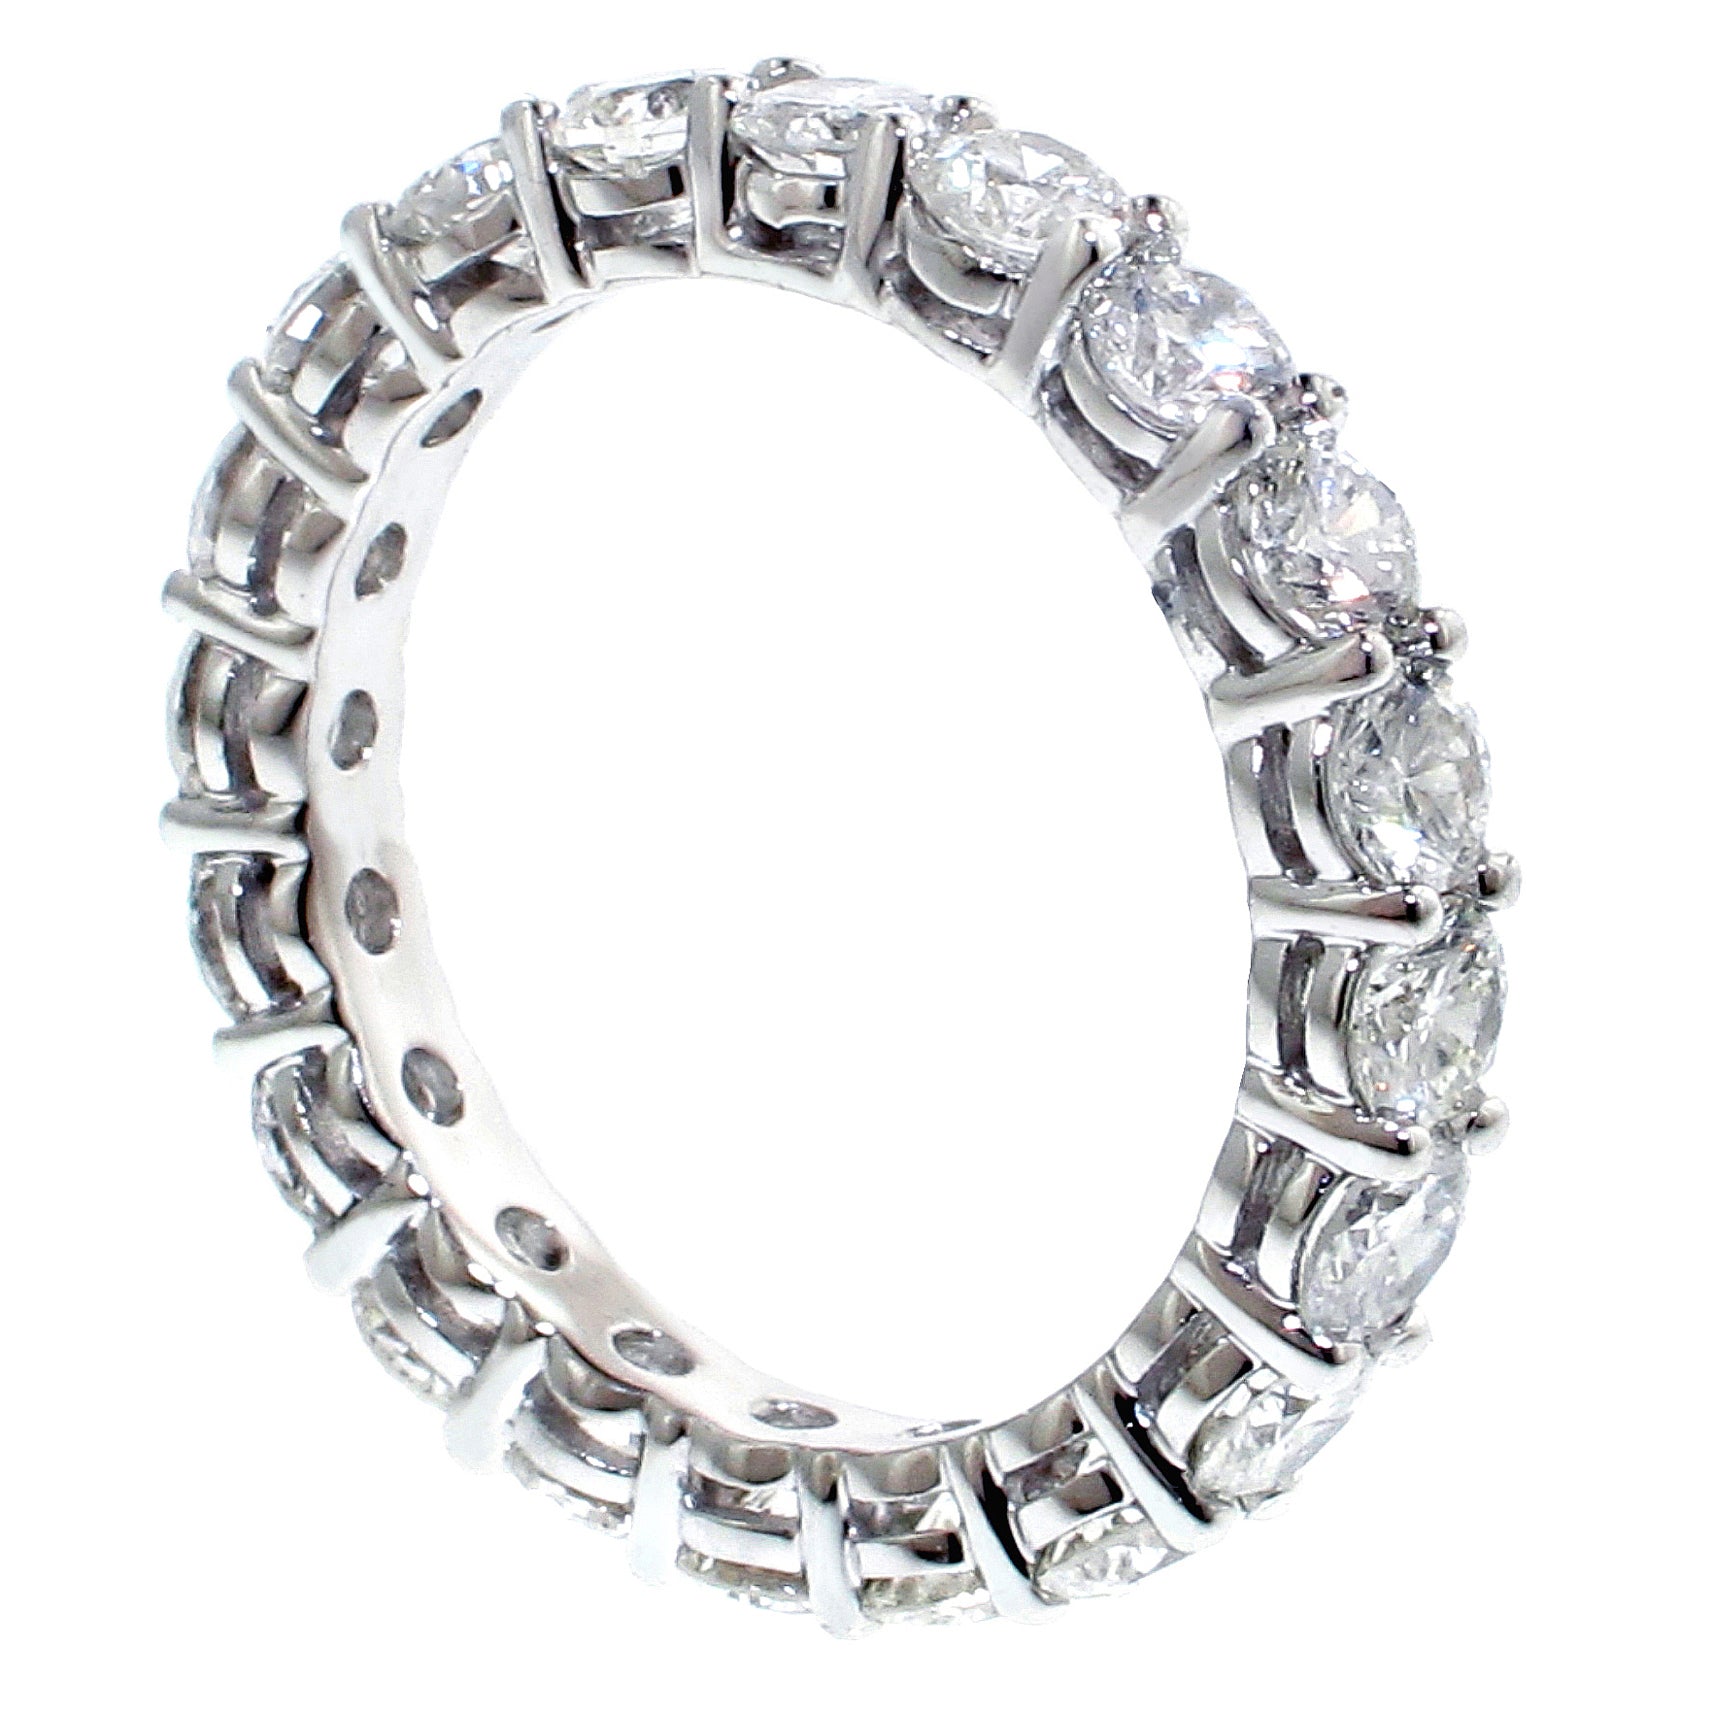 2.75 CT Shared Prong Round Diamond Eternity Wedding Band in 14k White Gold